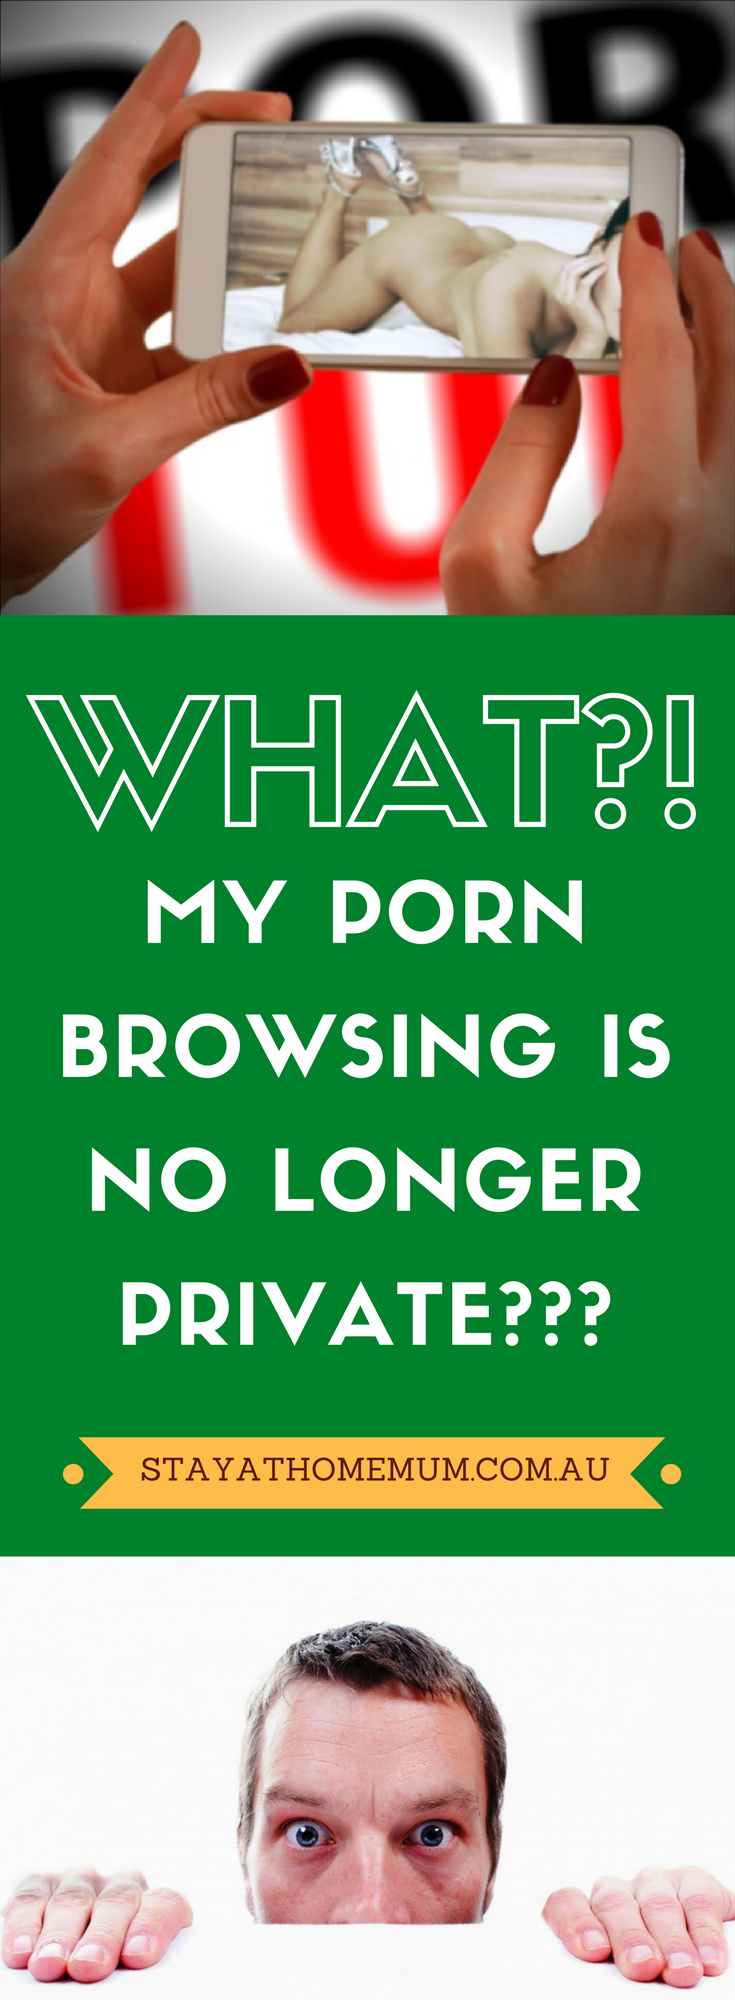 Porn Au My - What?! My Porn Browsing Is No Longer Private???